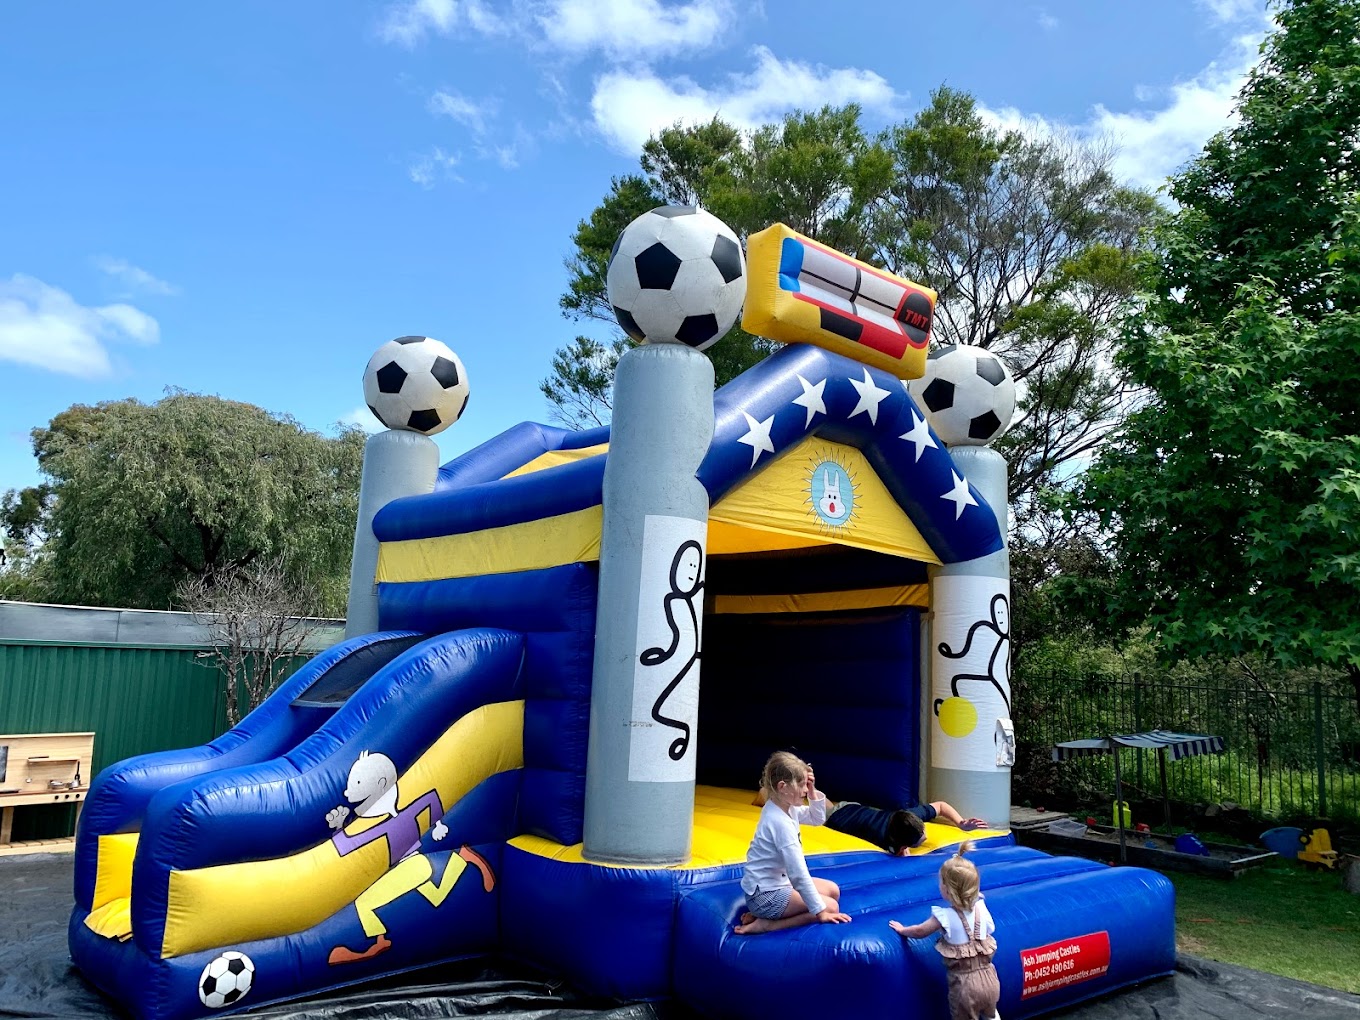 TPS Jumping Castle Hire